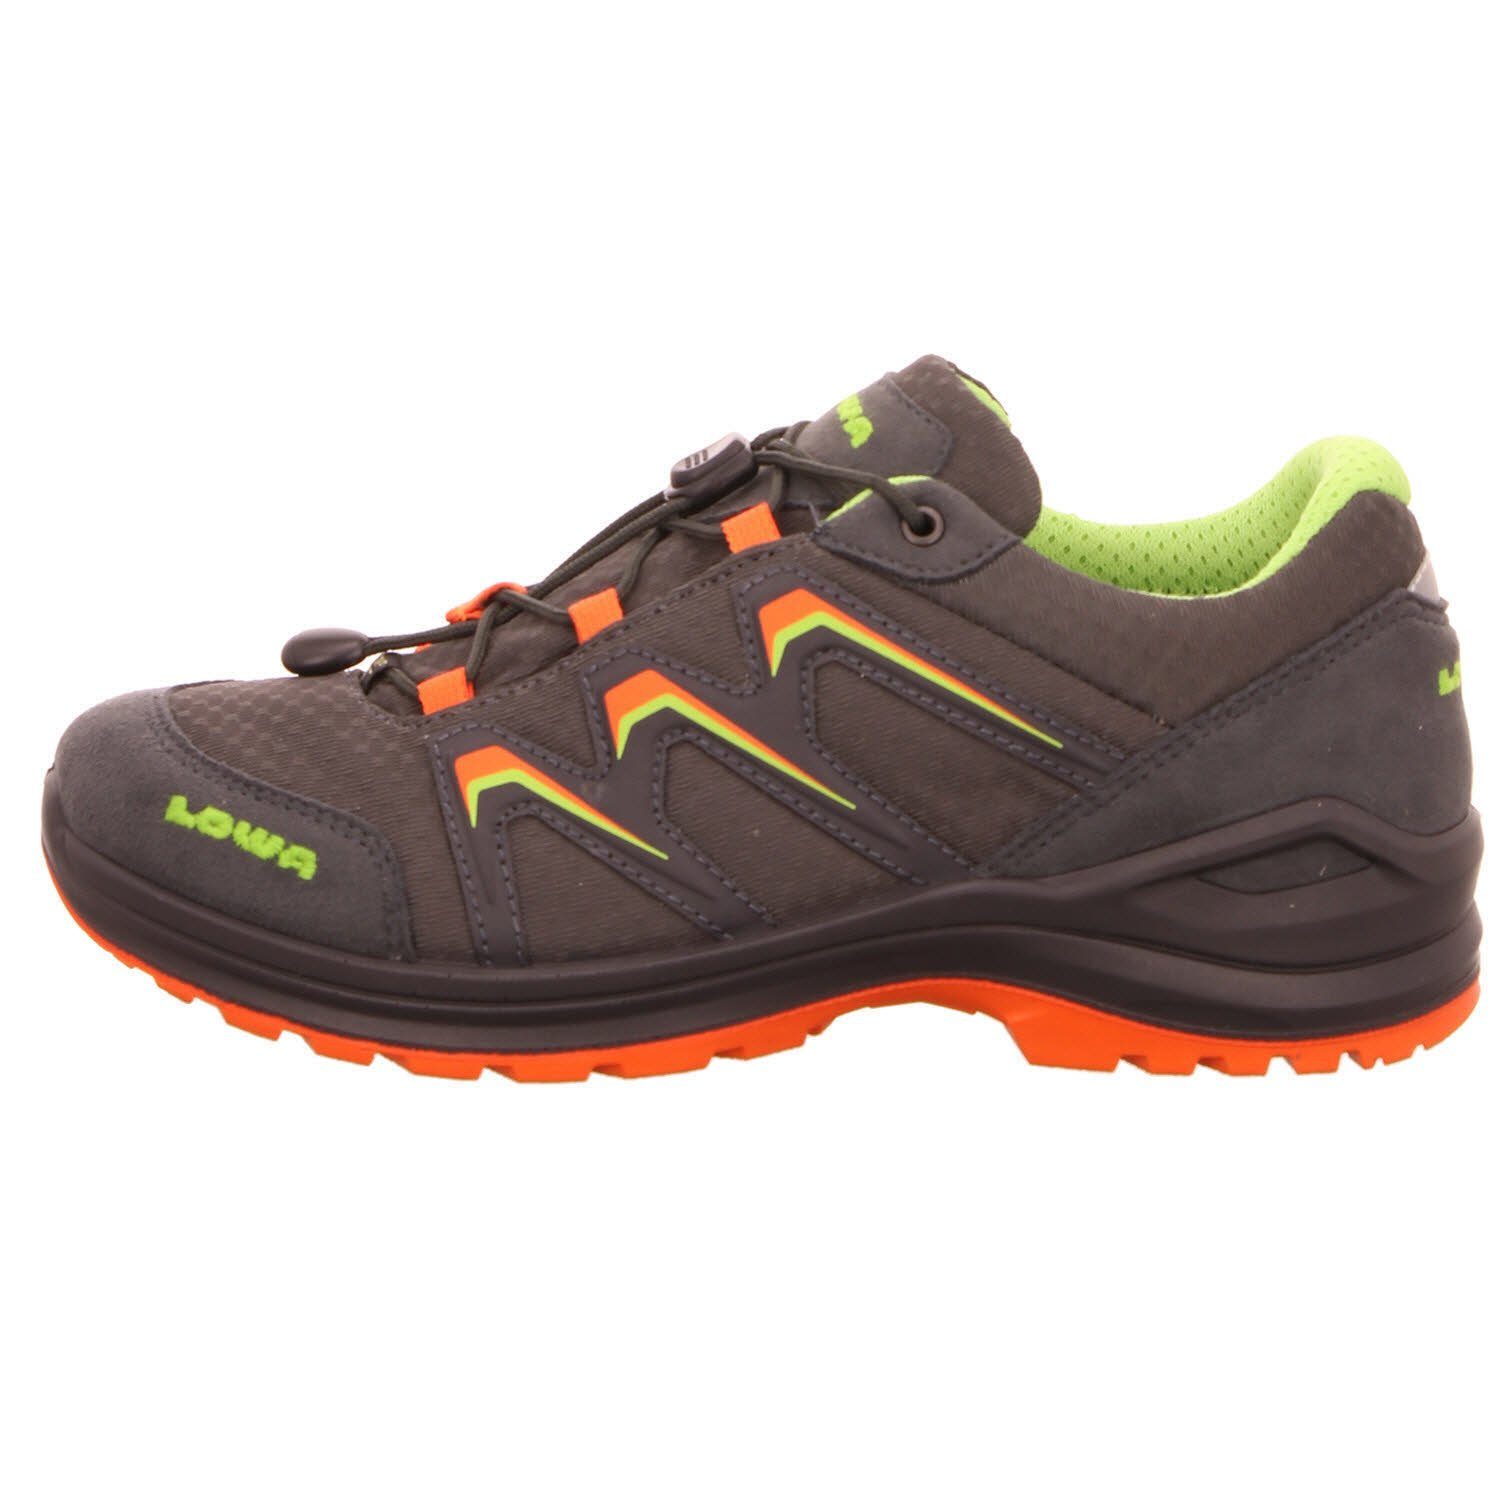 Outdoorschuh GRAPHIT/FLAME Lowa